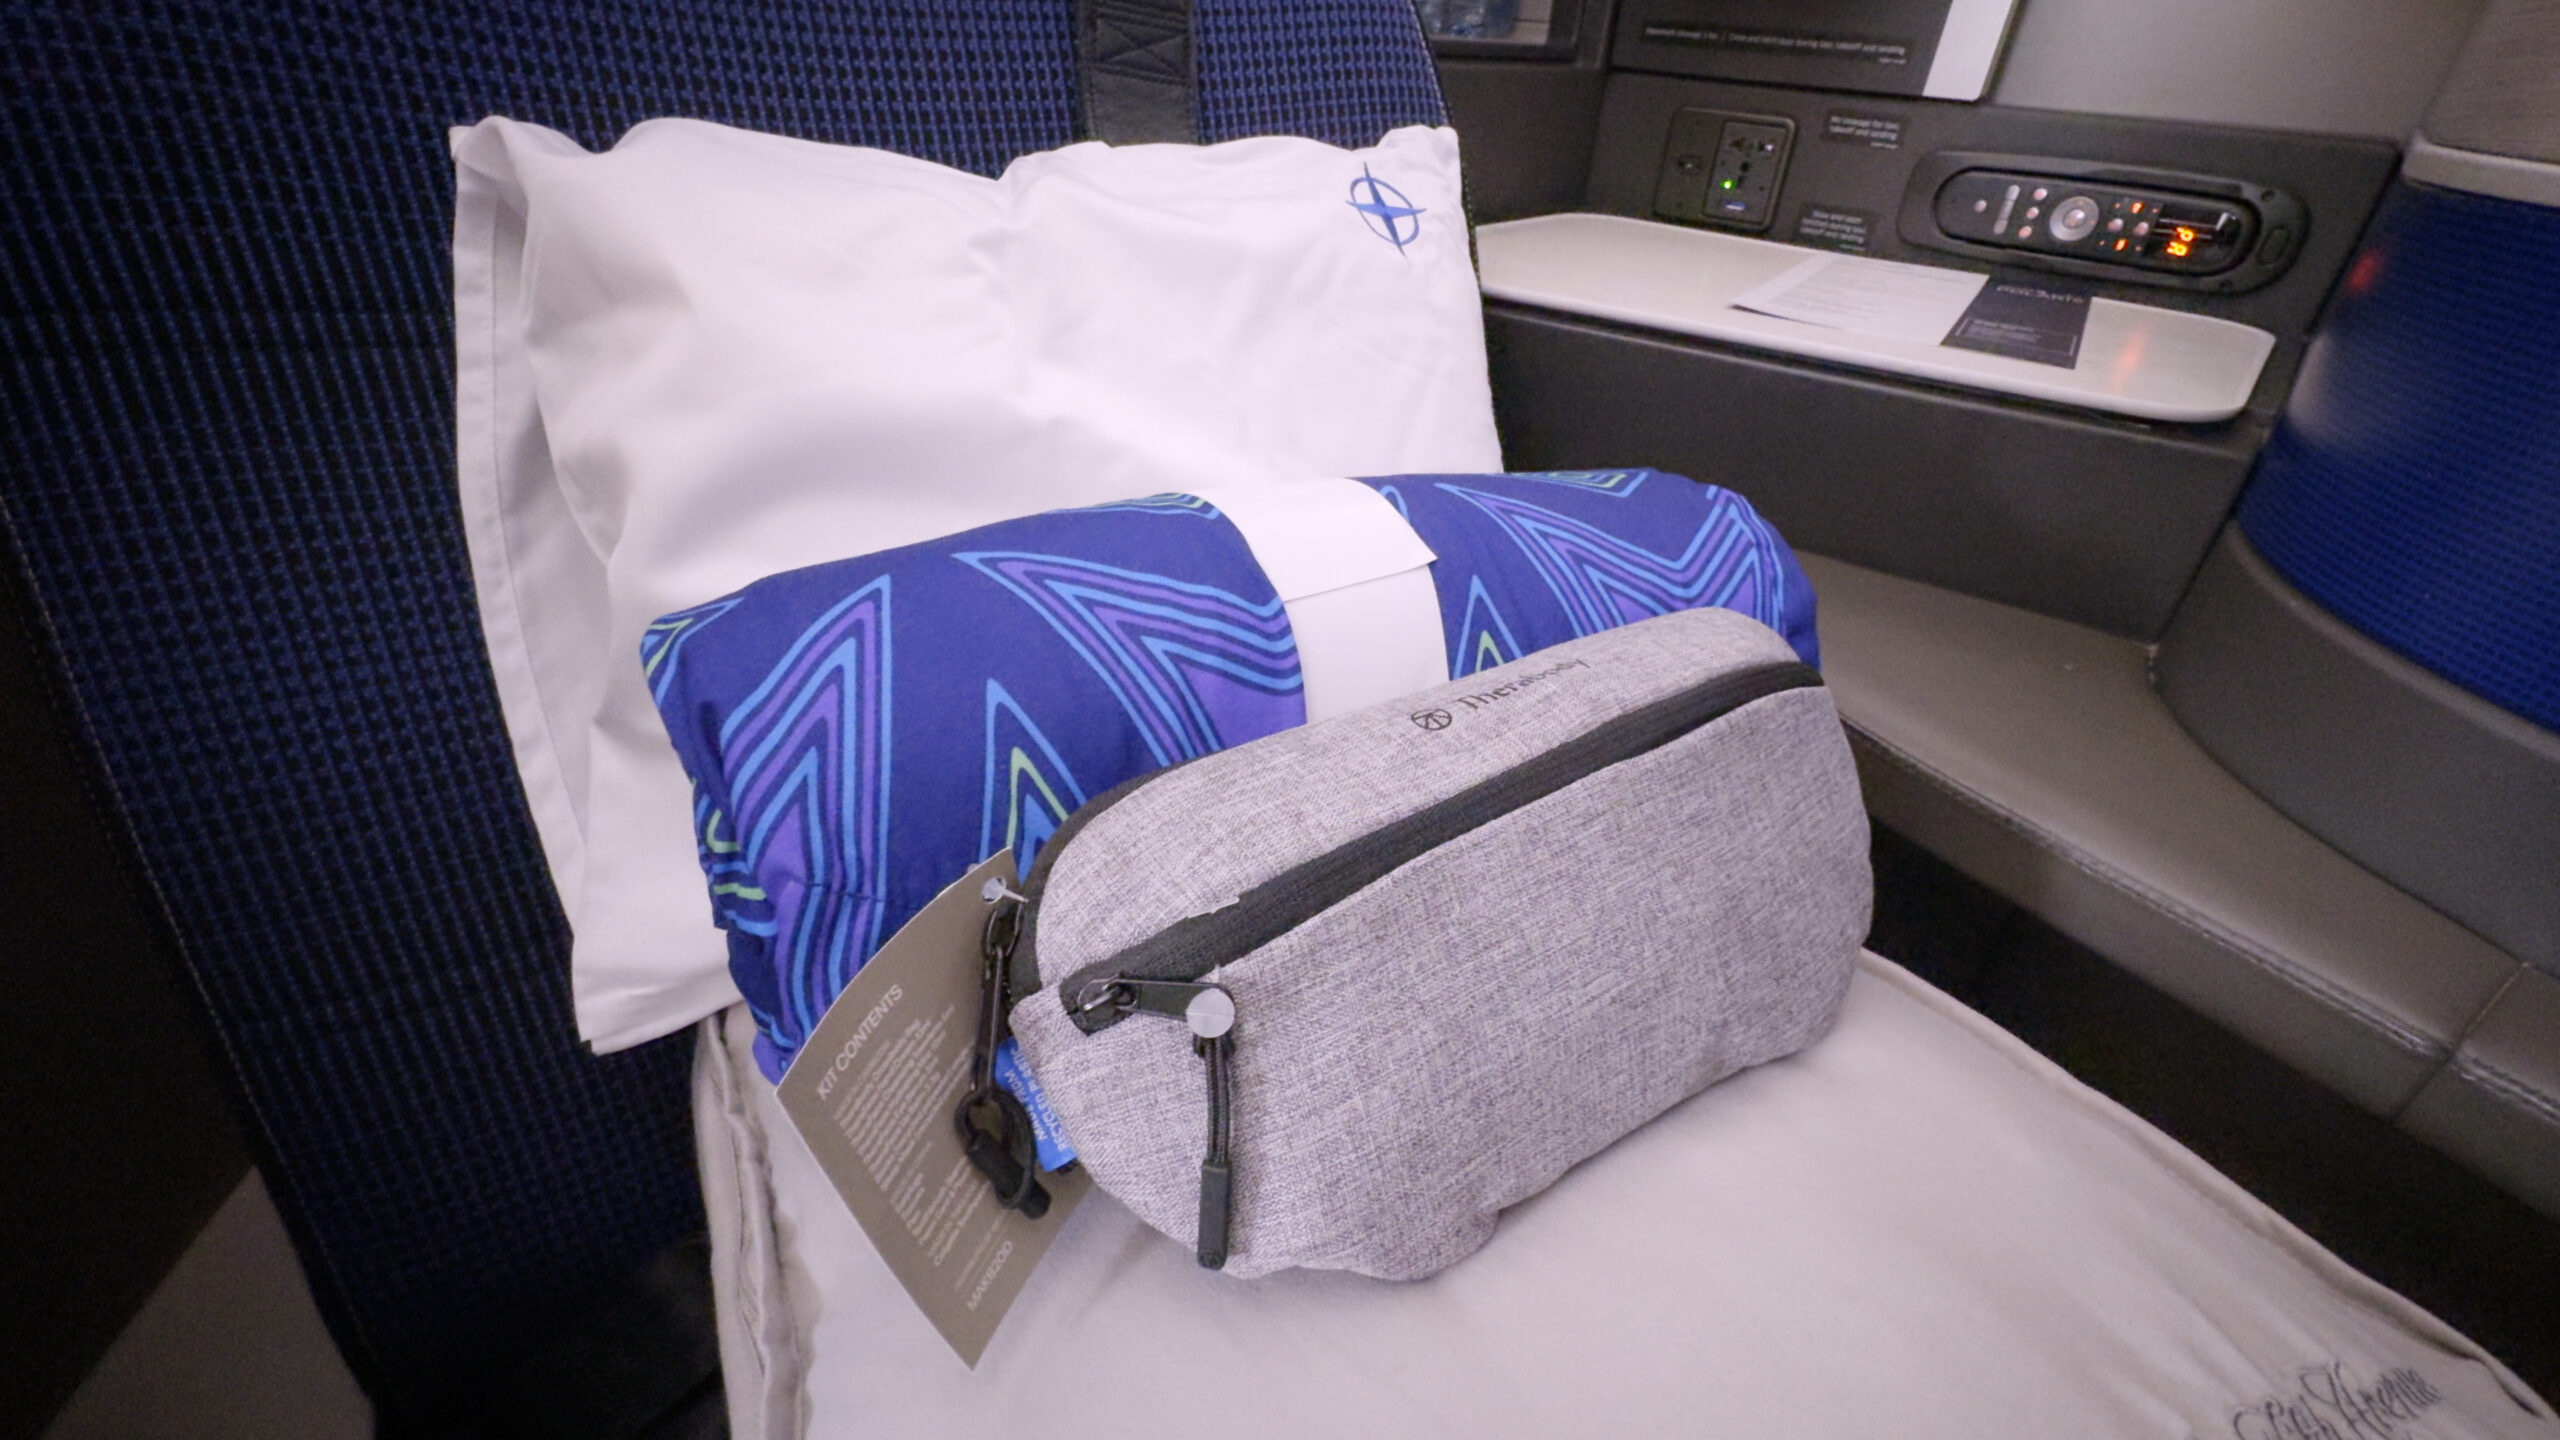 United Airlines Polaris Business Class Seat with amenities